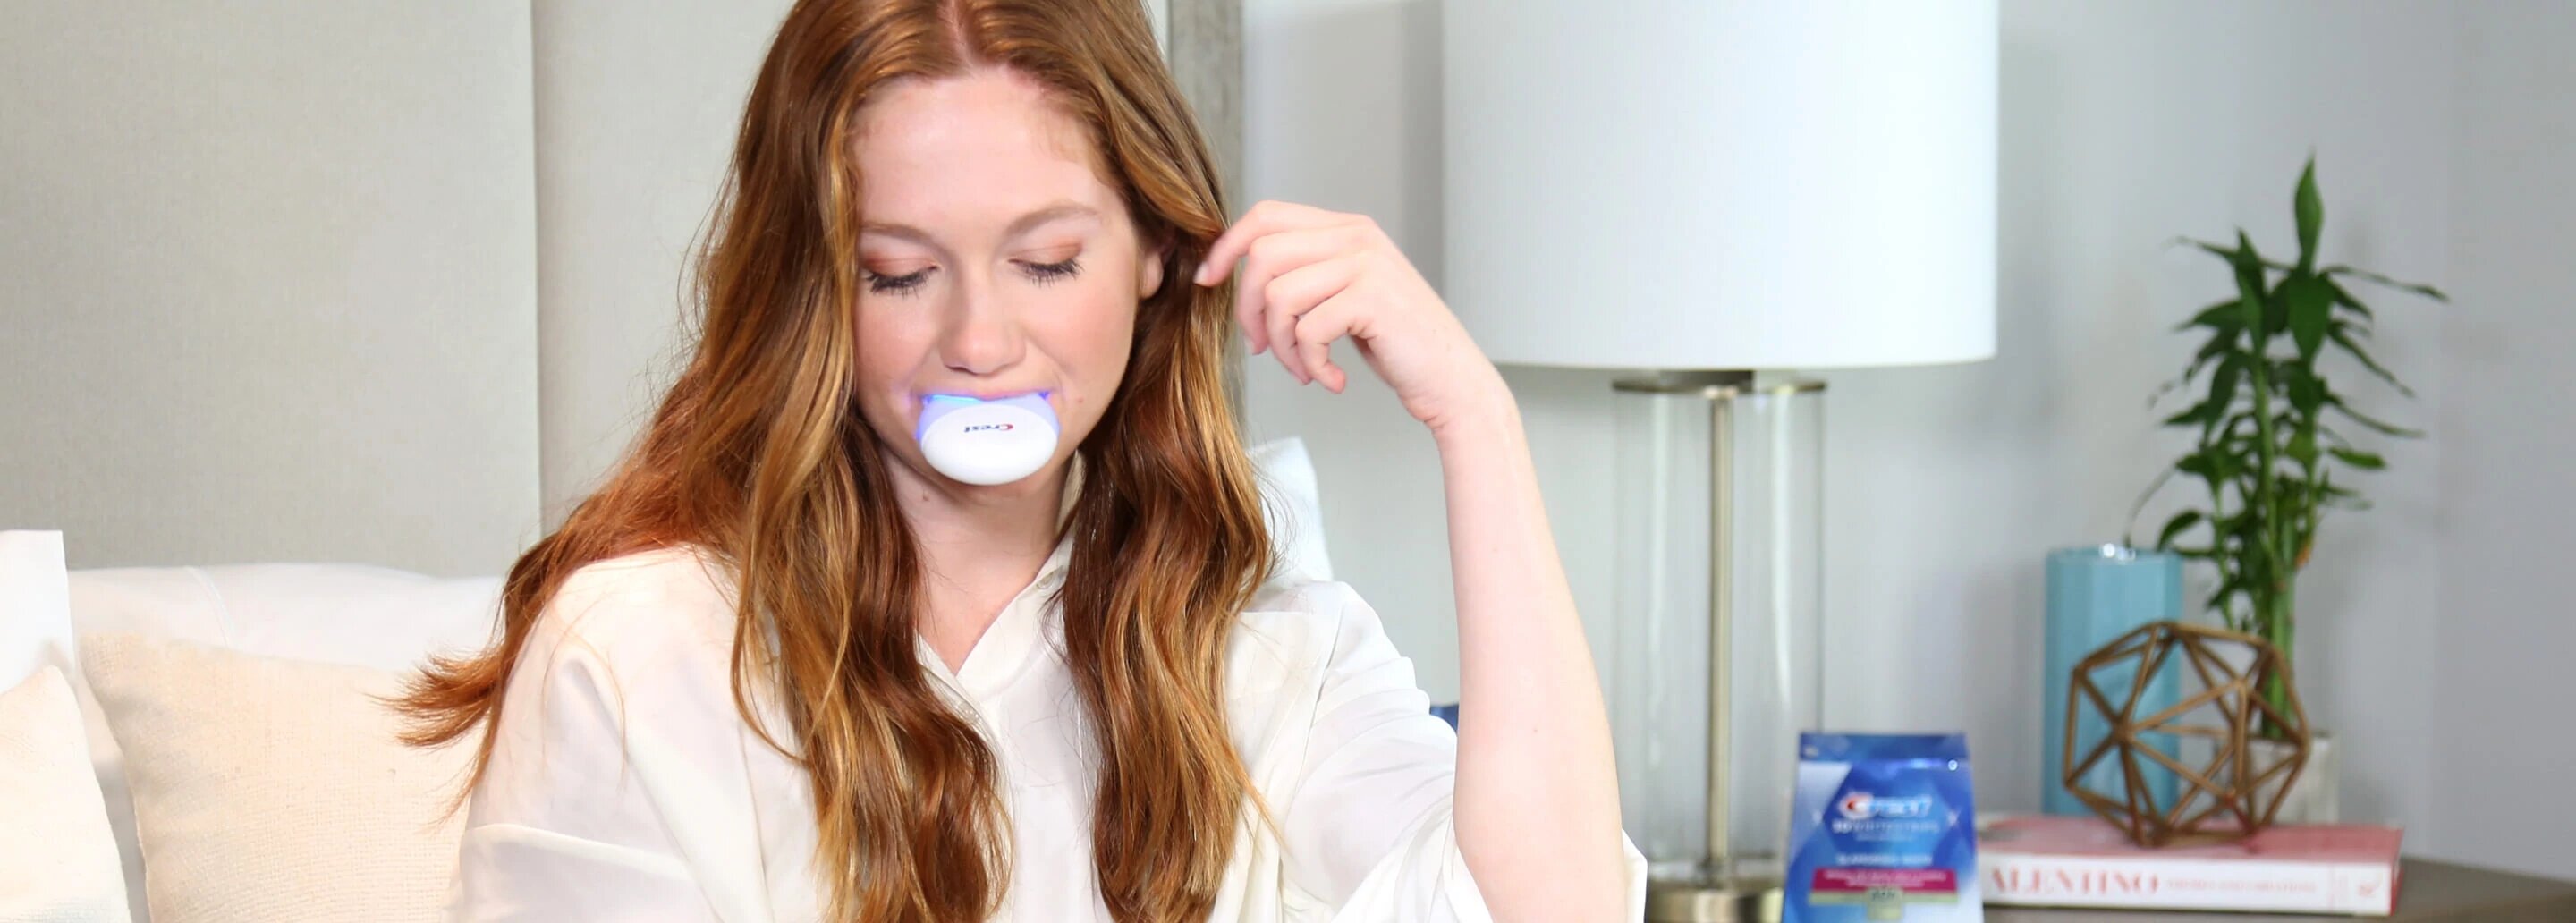 How-to-Use-Crest-Blue-Light-Teeth-Whitening-Kit 